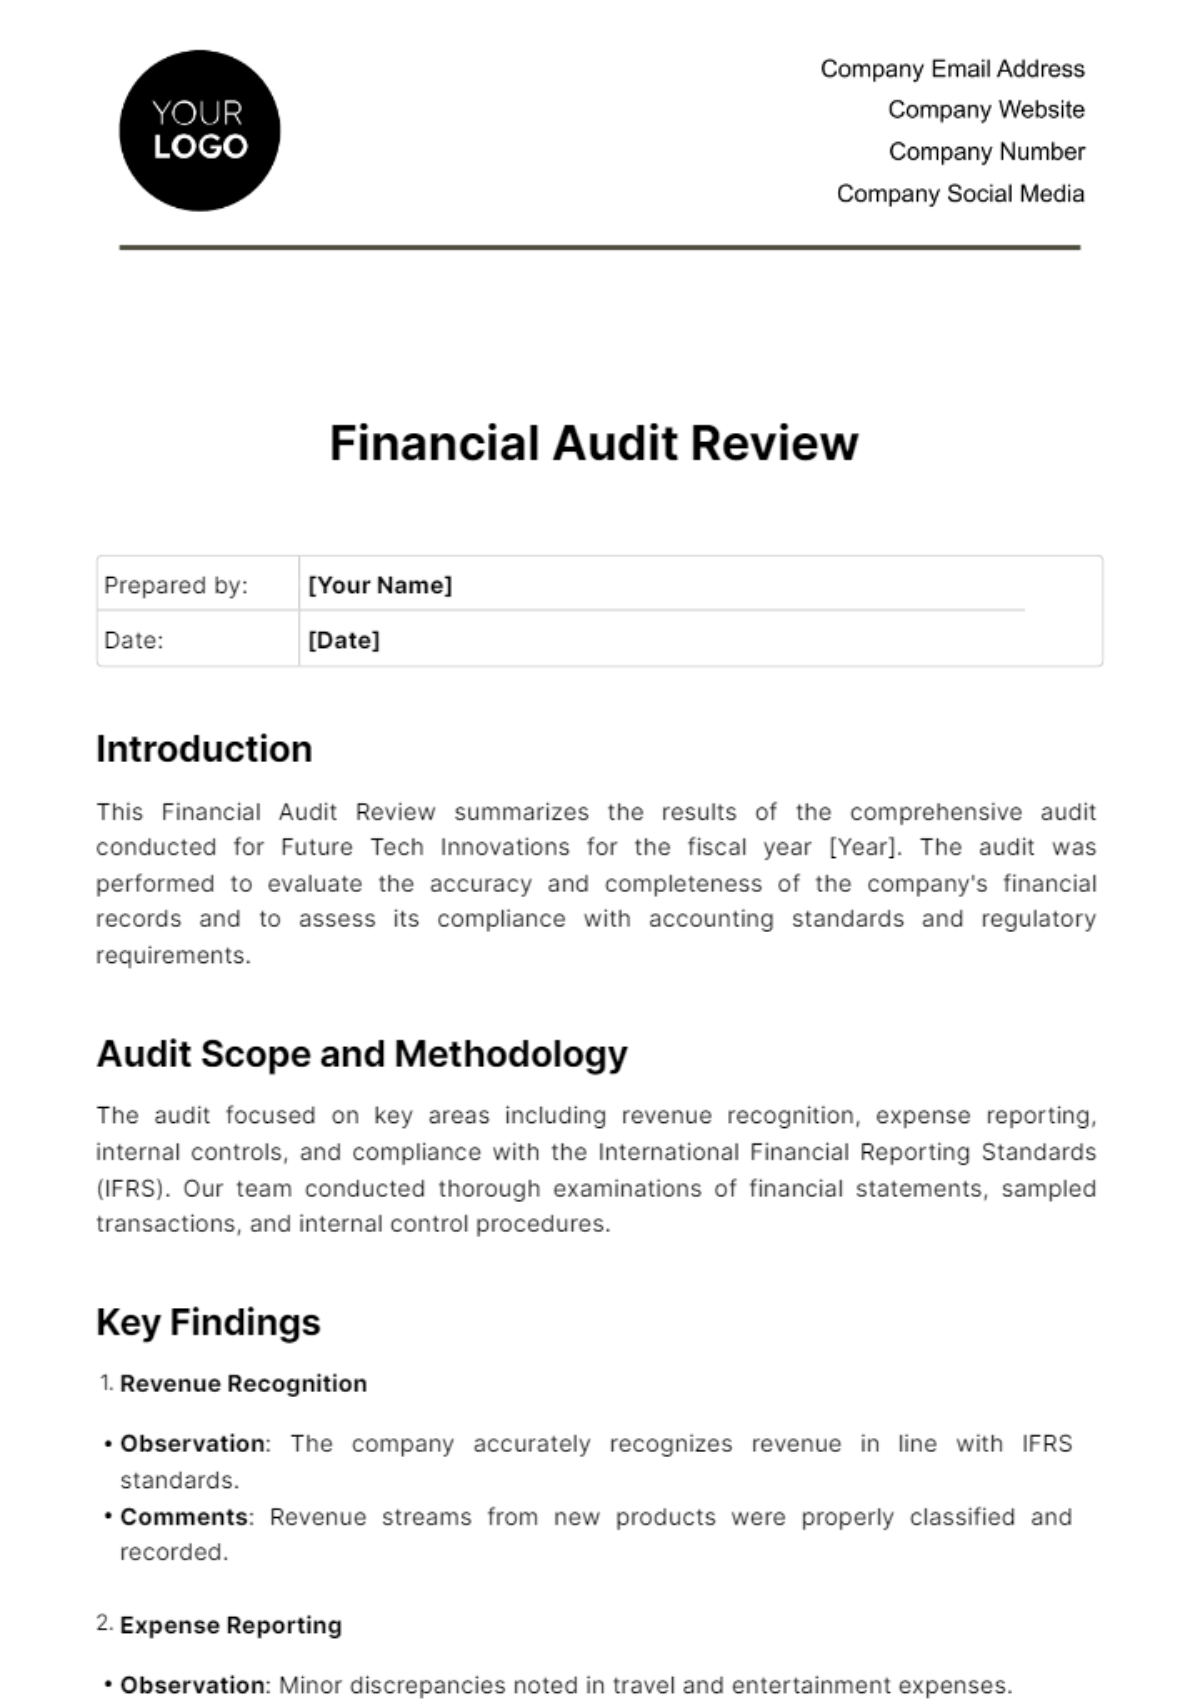 Free Financial Audit Review Template